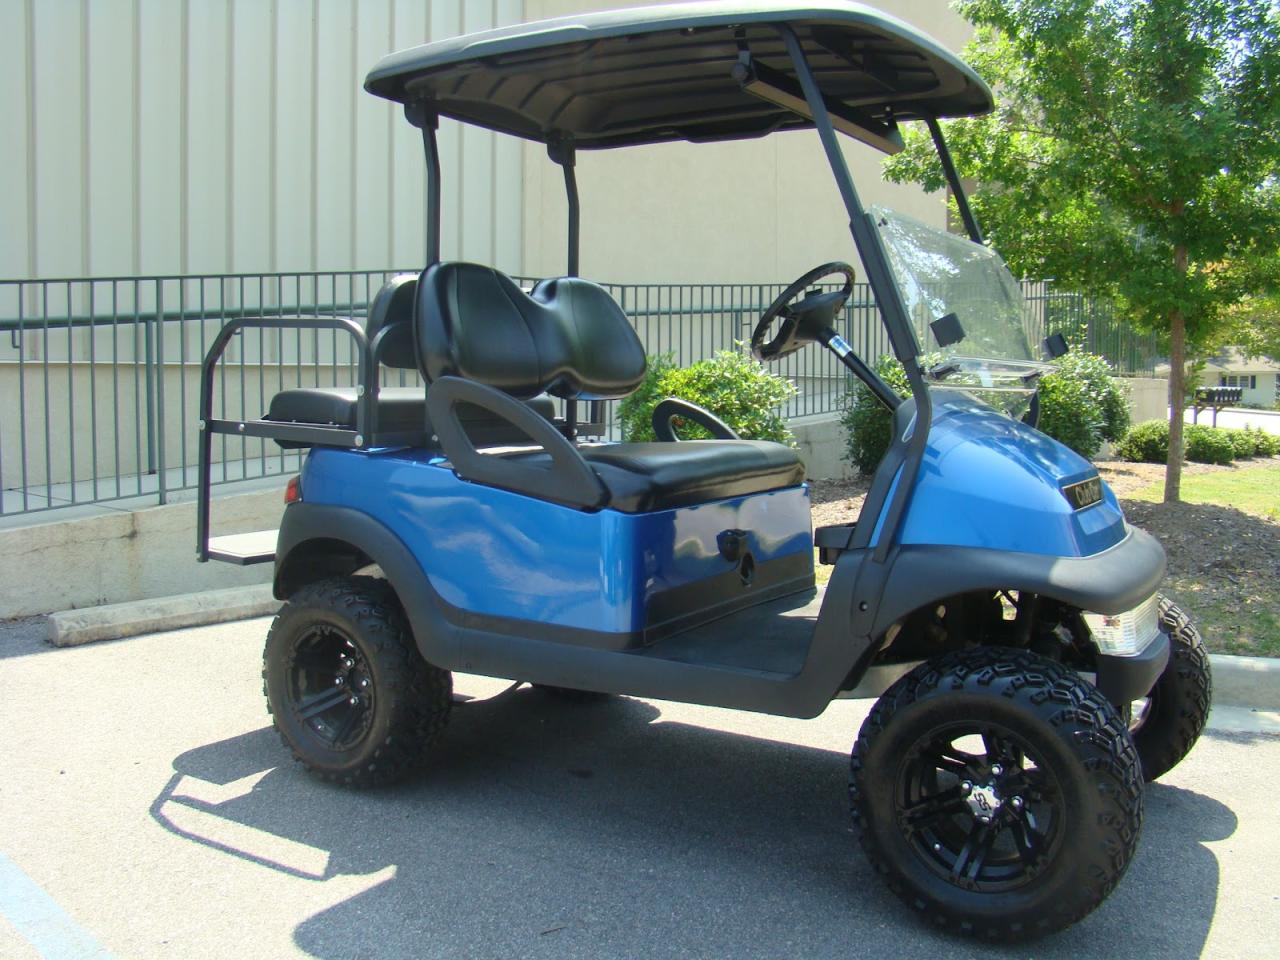 Own Your Ride: Find Used Golf Carts for Sale in Lawrence, Kentucky